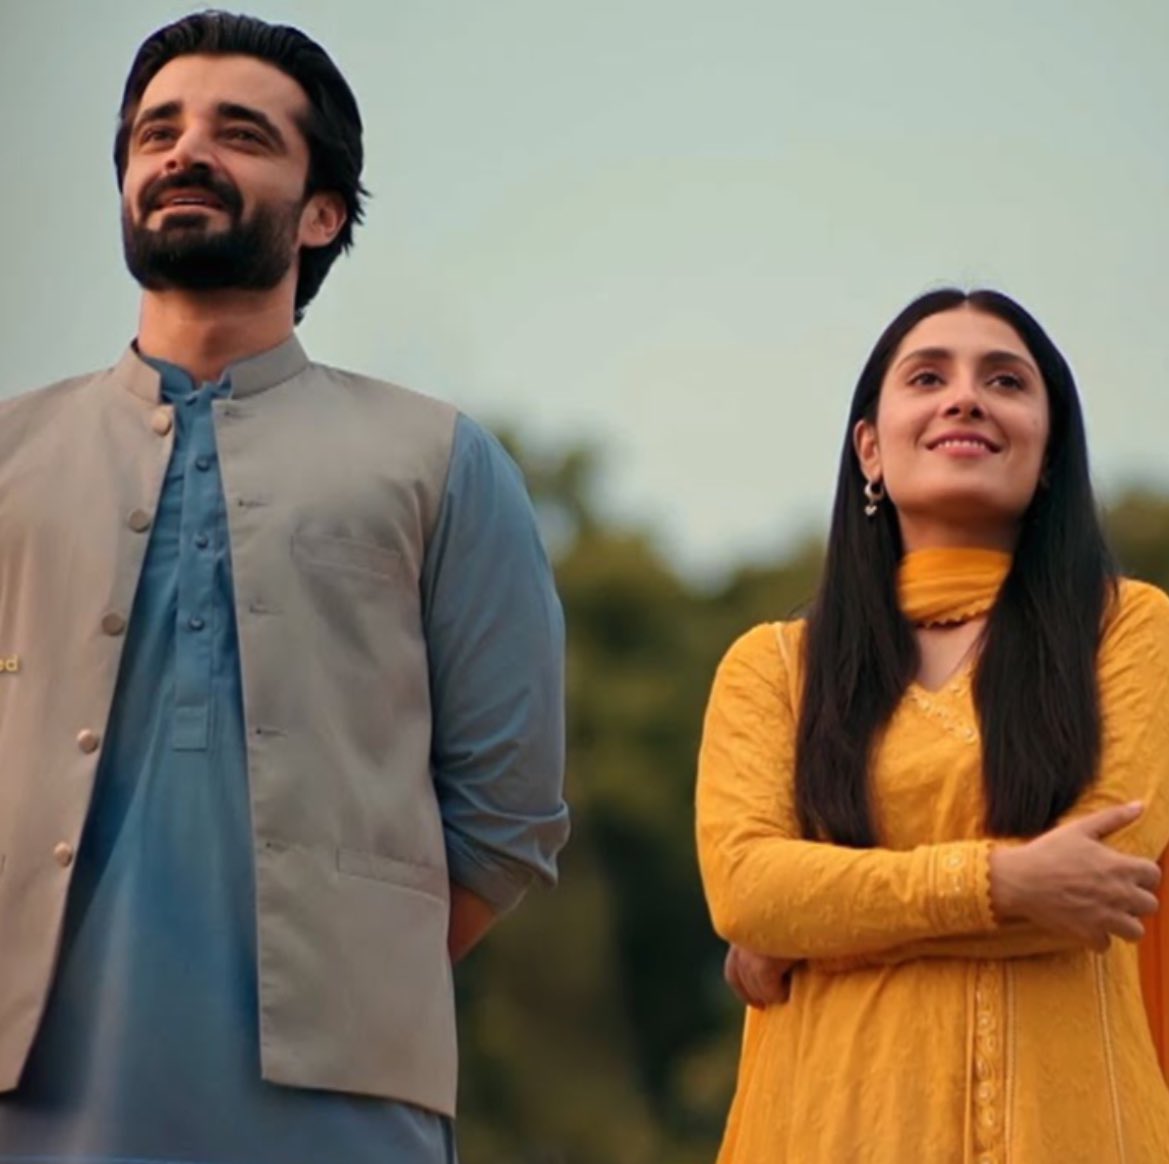 Stick with me, this is long, but I see a lot of hate for Mahnoor and while she is being really unfair and I am in support of Shehram…..we should understand her point of view. Shehram and Mahnoor were in love - but neither verbally expressed it. 1/10 #JaanEJahan #PakistaniDramas